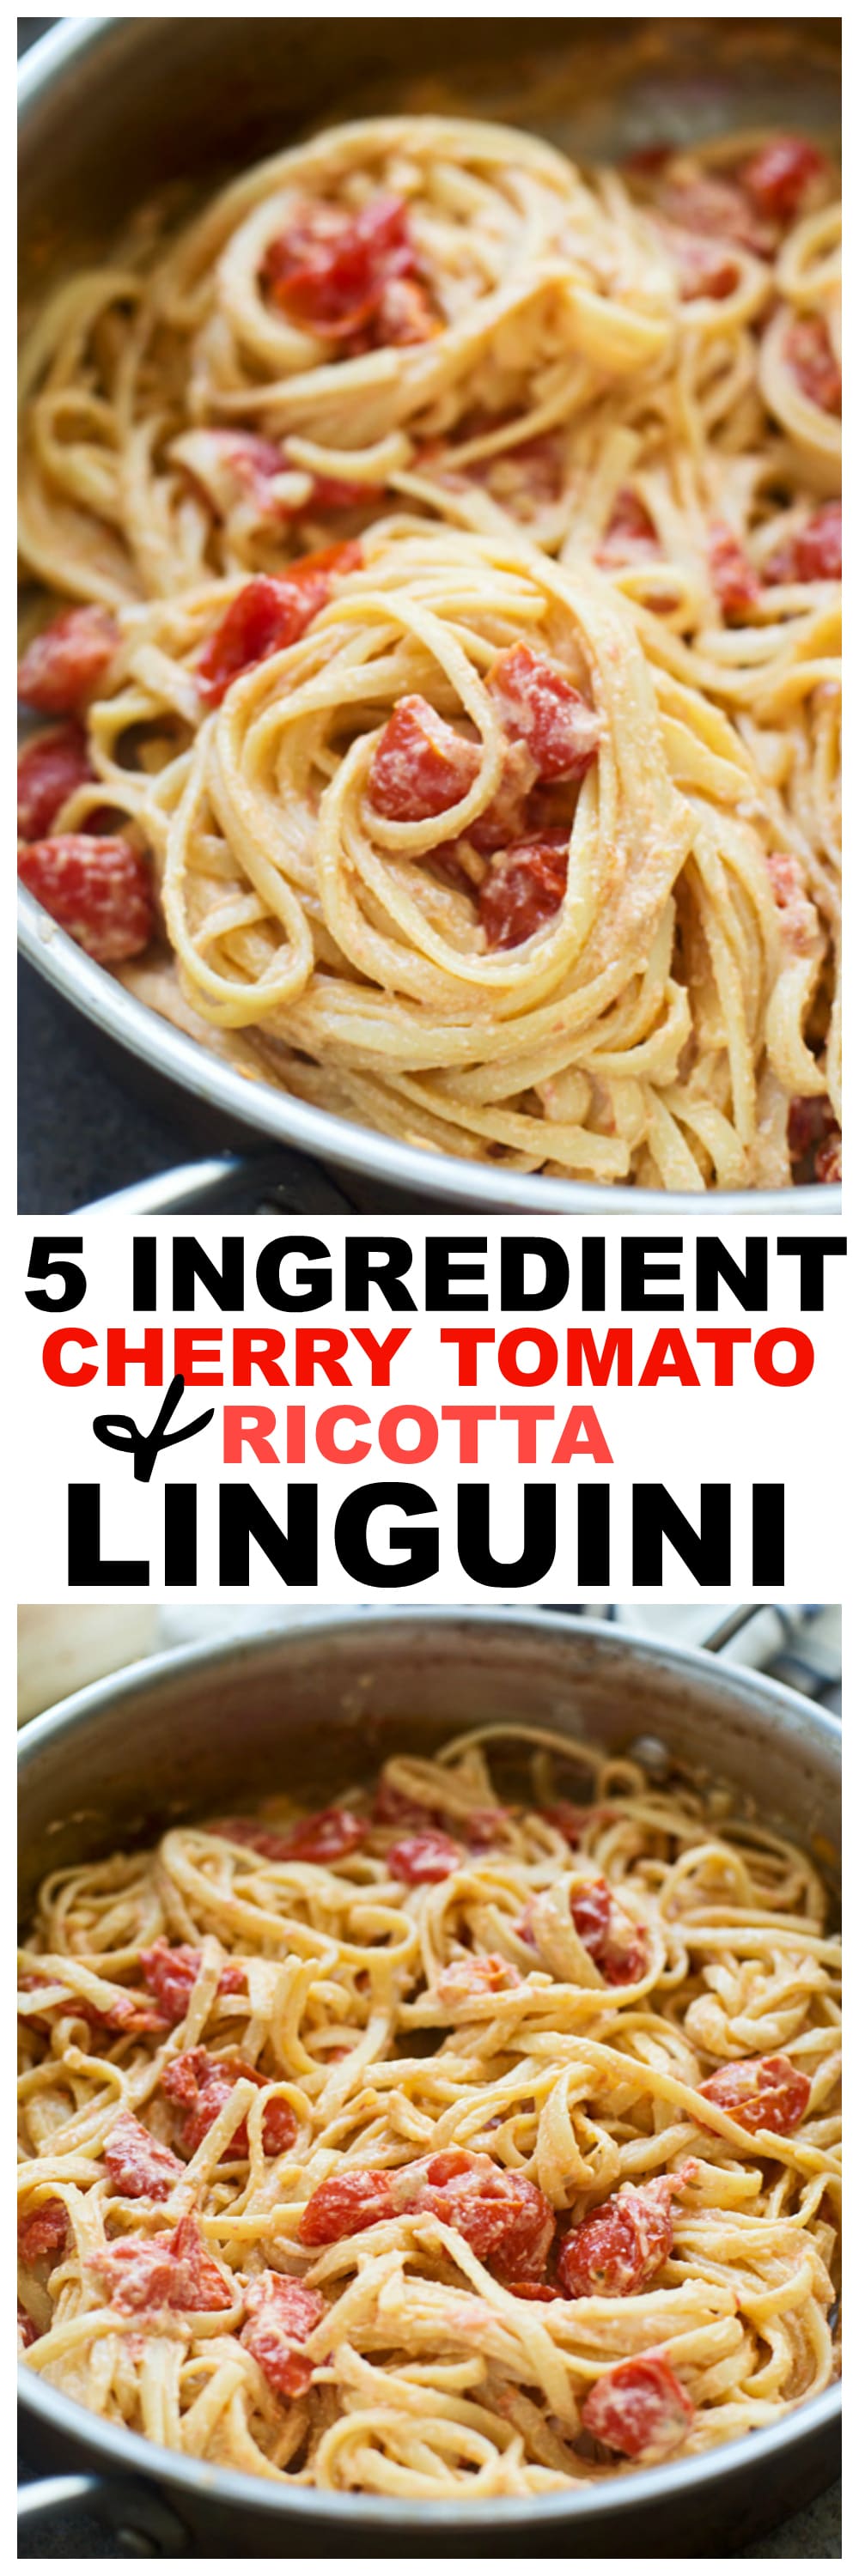 5 Ingredient Cherry Tomato &amp; Ricotta Linguini - Less than 30 minutes to throw together!